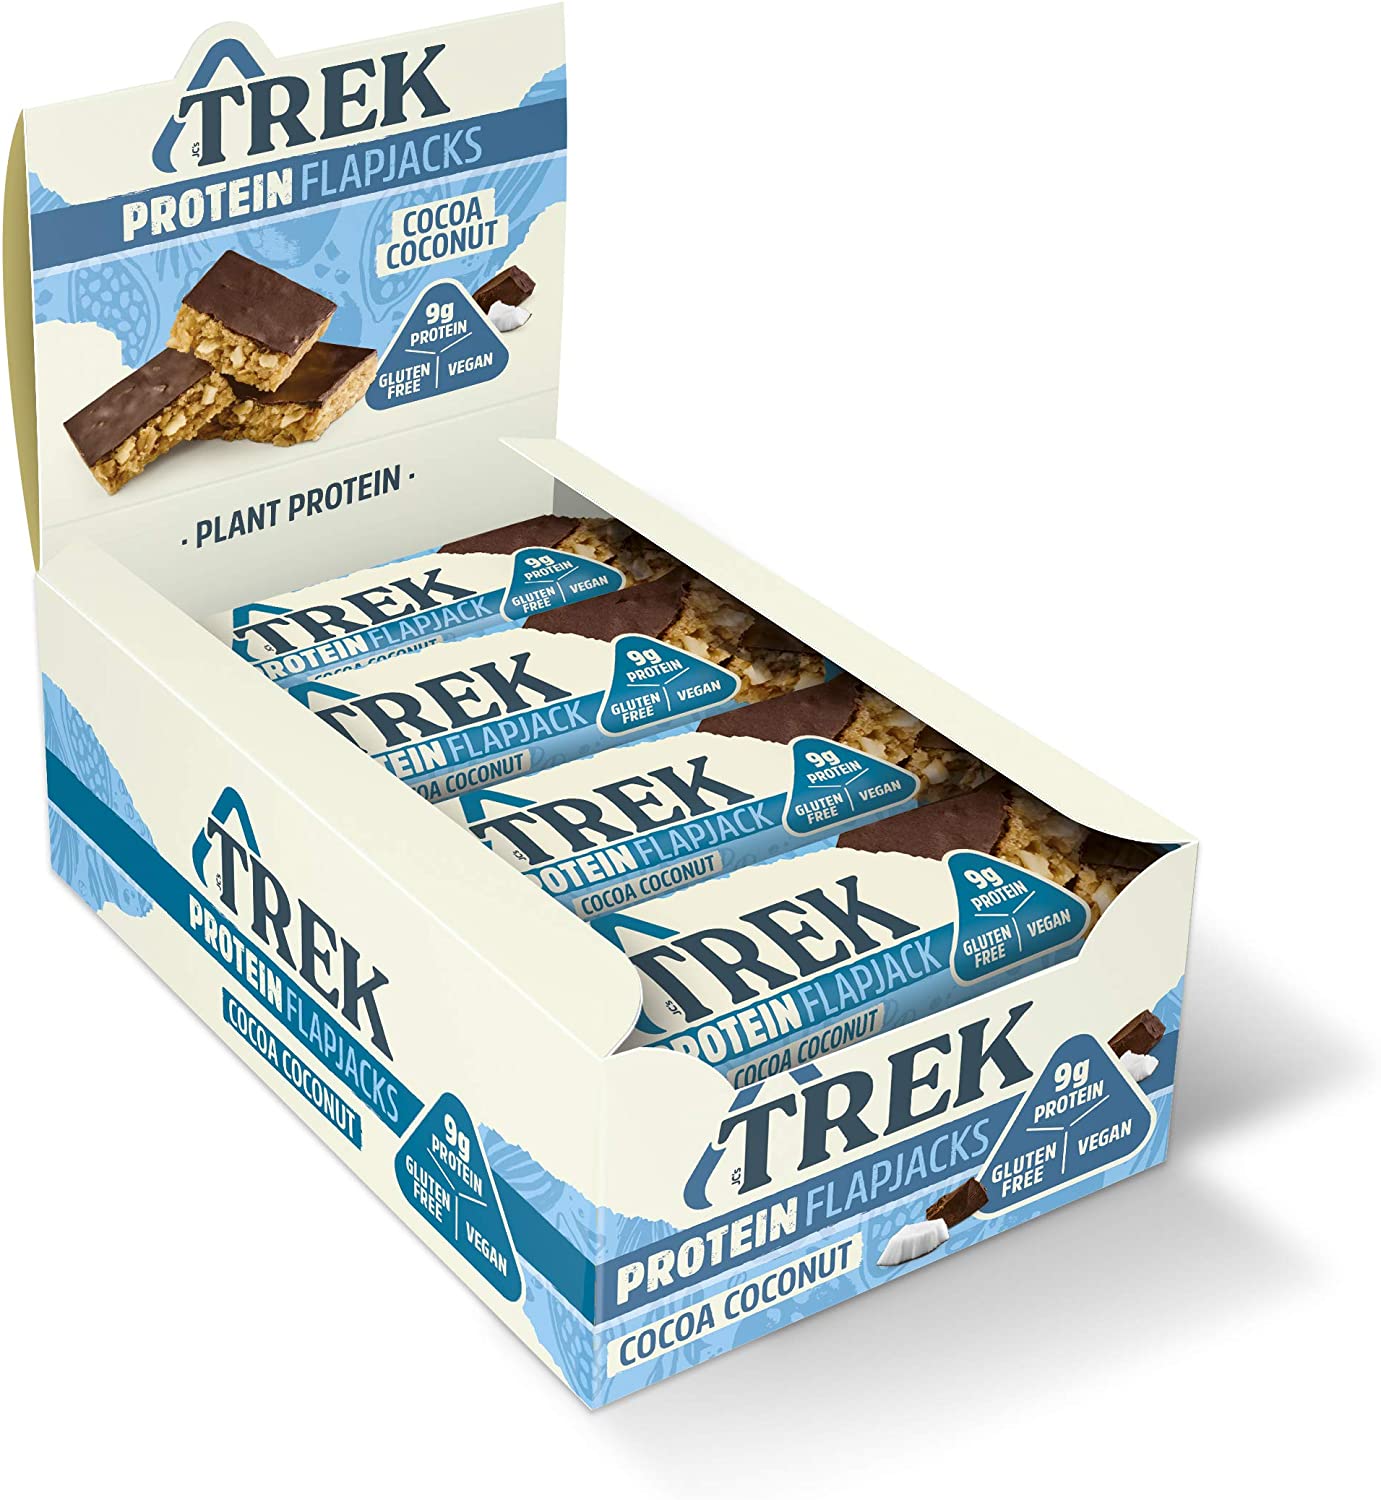 10 Best Protein Bars for Weight Loss - Last Verdict™